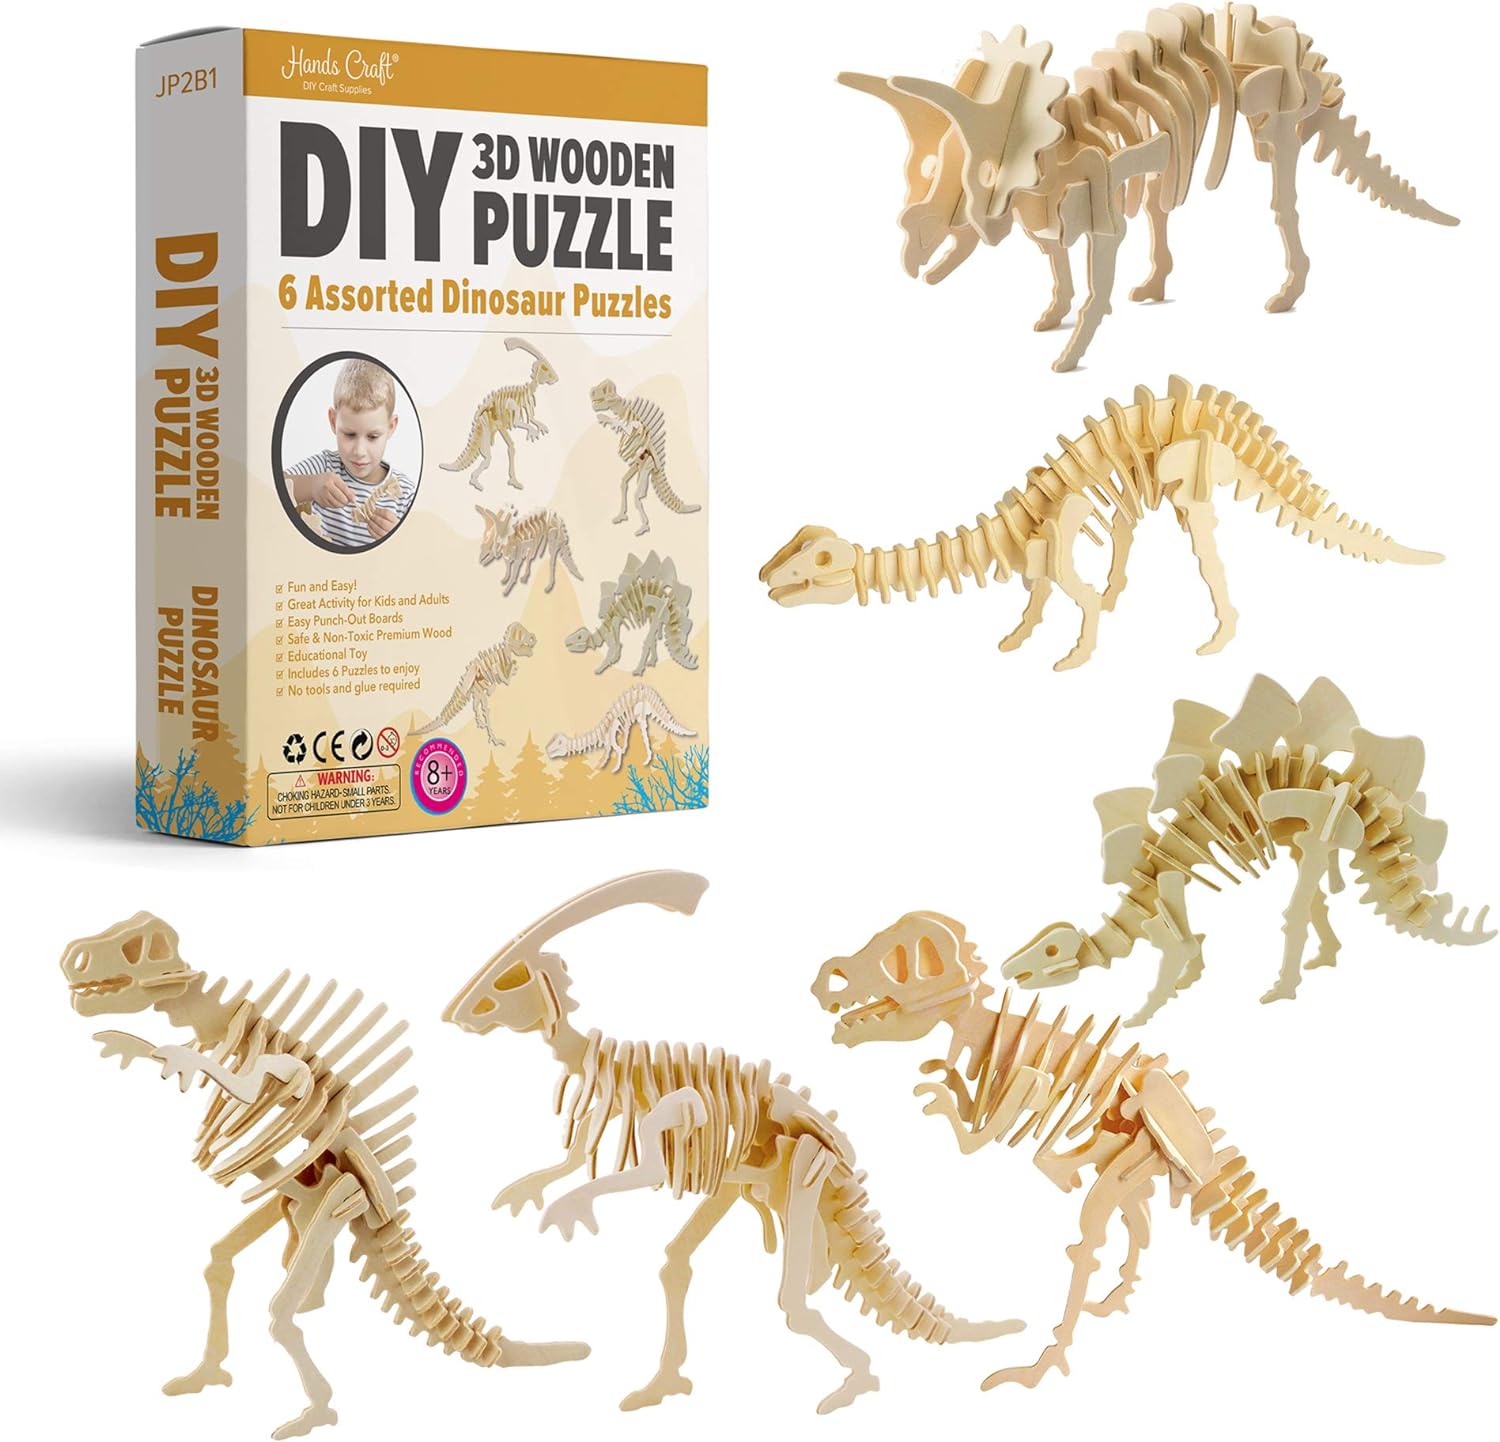 Hands Craft DIY 3D Wooden Puzzle  6 Assorted Dinosaur Bundle Pack Set Brain Teaser Puzzles Educational STEM Toy Adults and Kids to Build Safe and Non-Toxic Easy Punch Out Premium Wood JP2B1